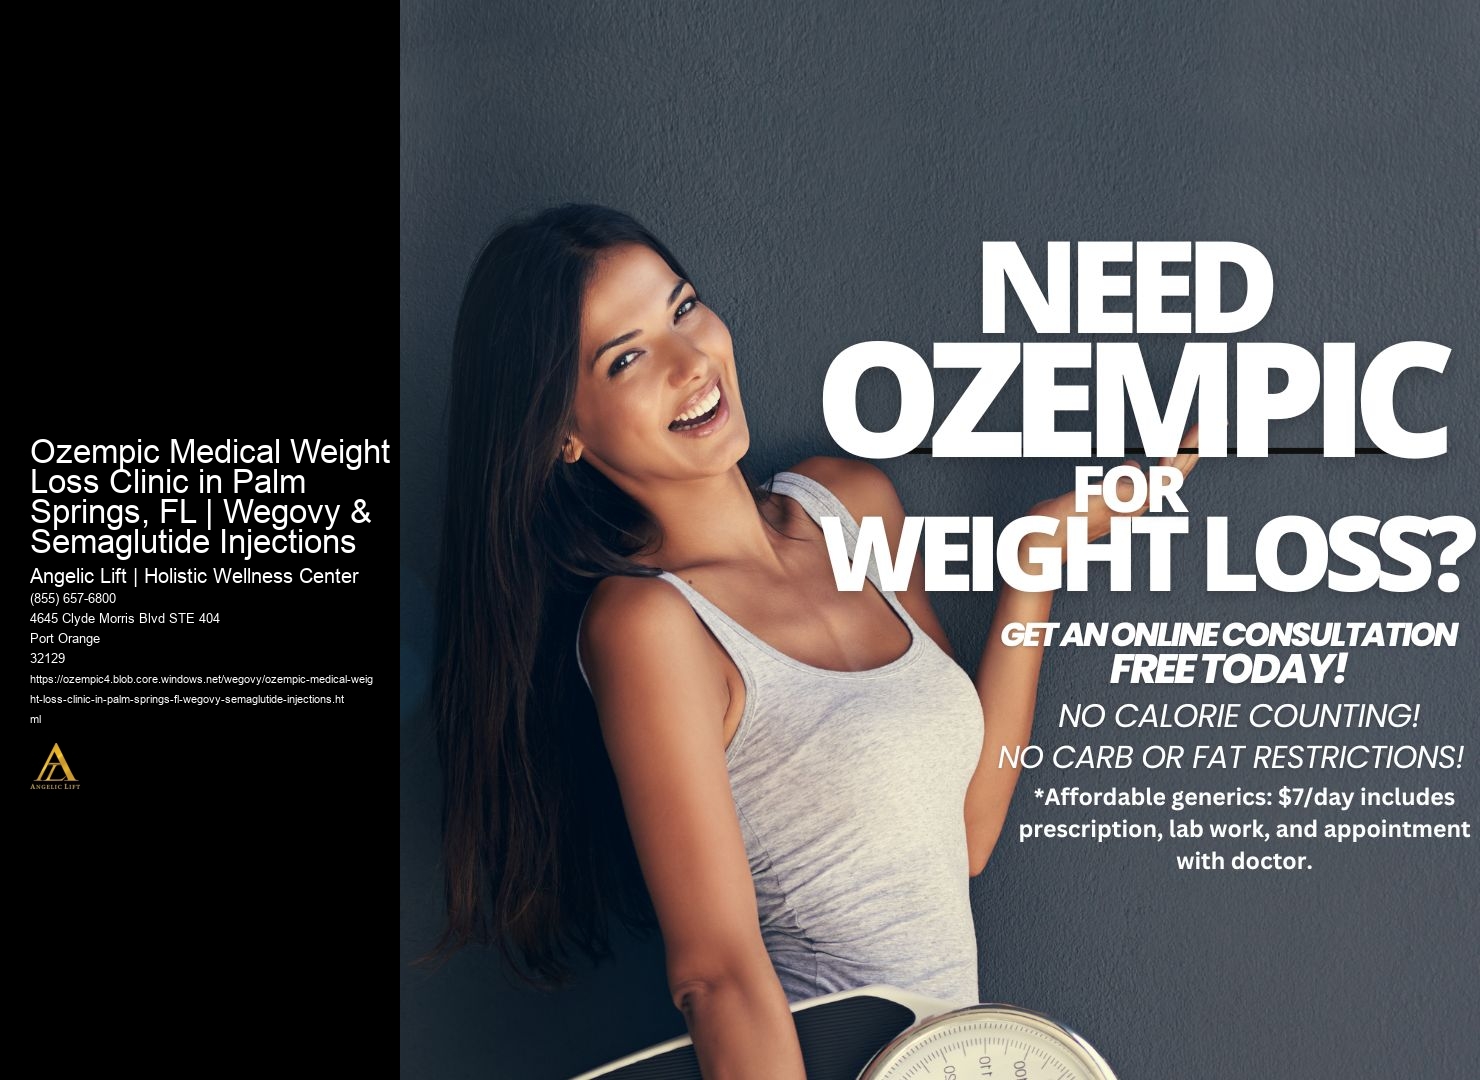 Ozempic Medical Weight Loss Clinic in Palm Springs, FL | Wegovy & Semaglutide Injections